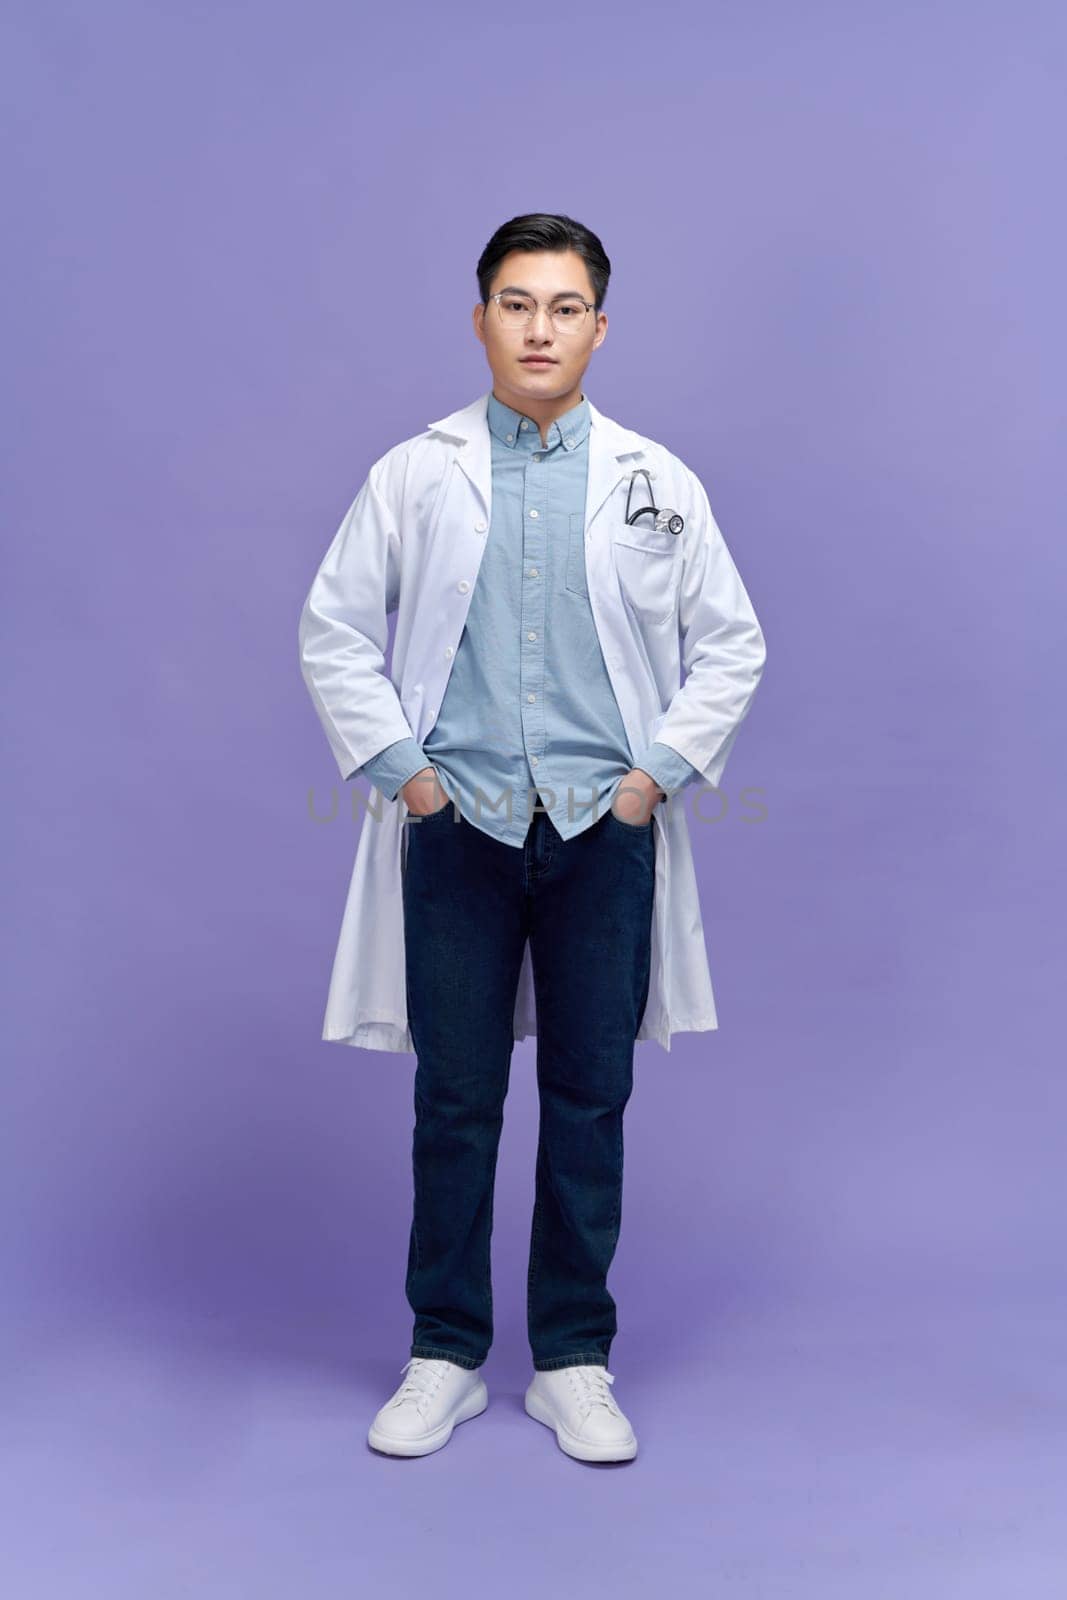 Handsome young doctor in a dressing gown with a stethoscope on a purple background